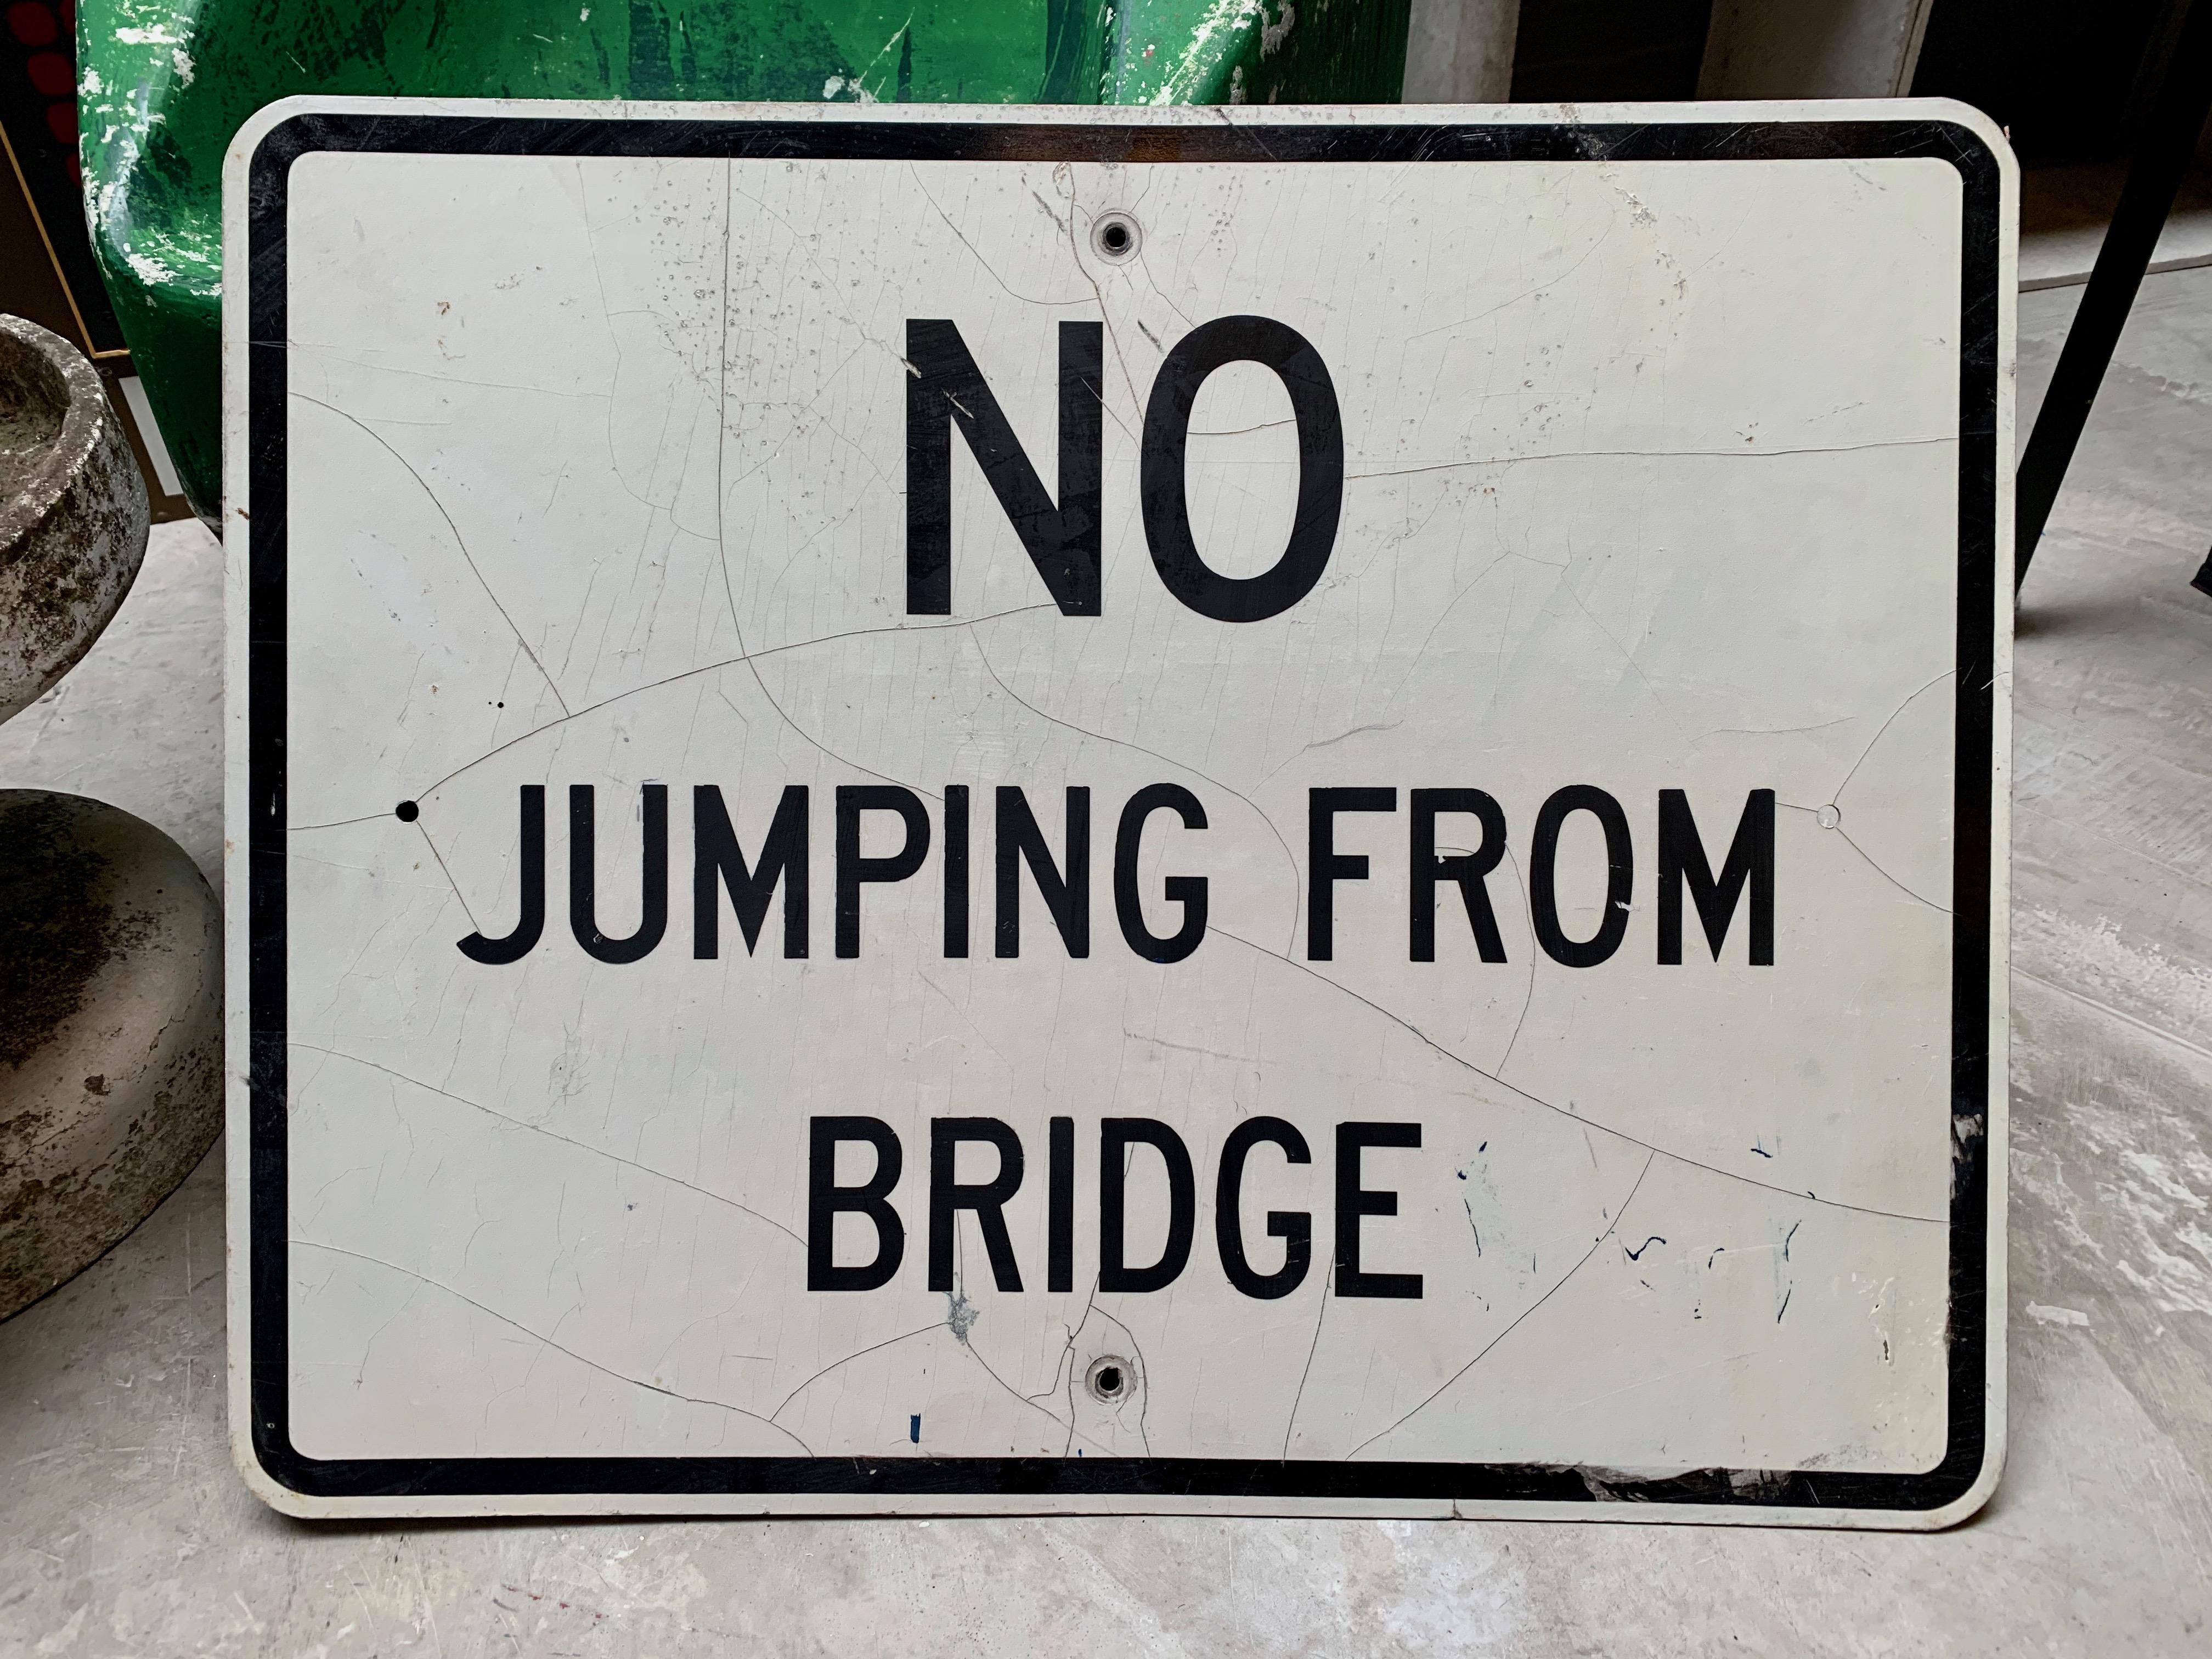 Rare vintage steel road sign warning people not to jump from the bridge. White sign with black lettering 